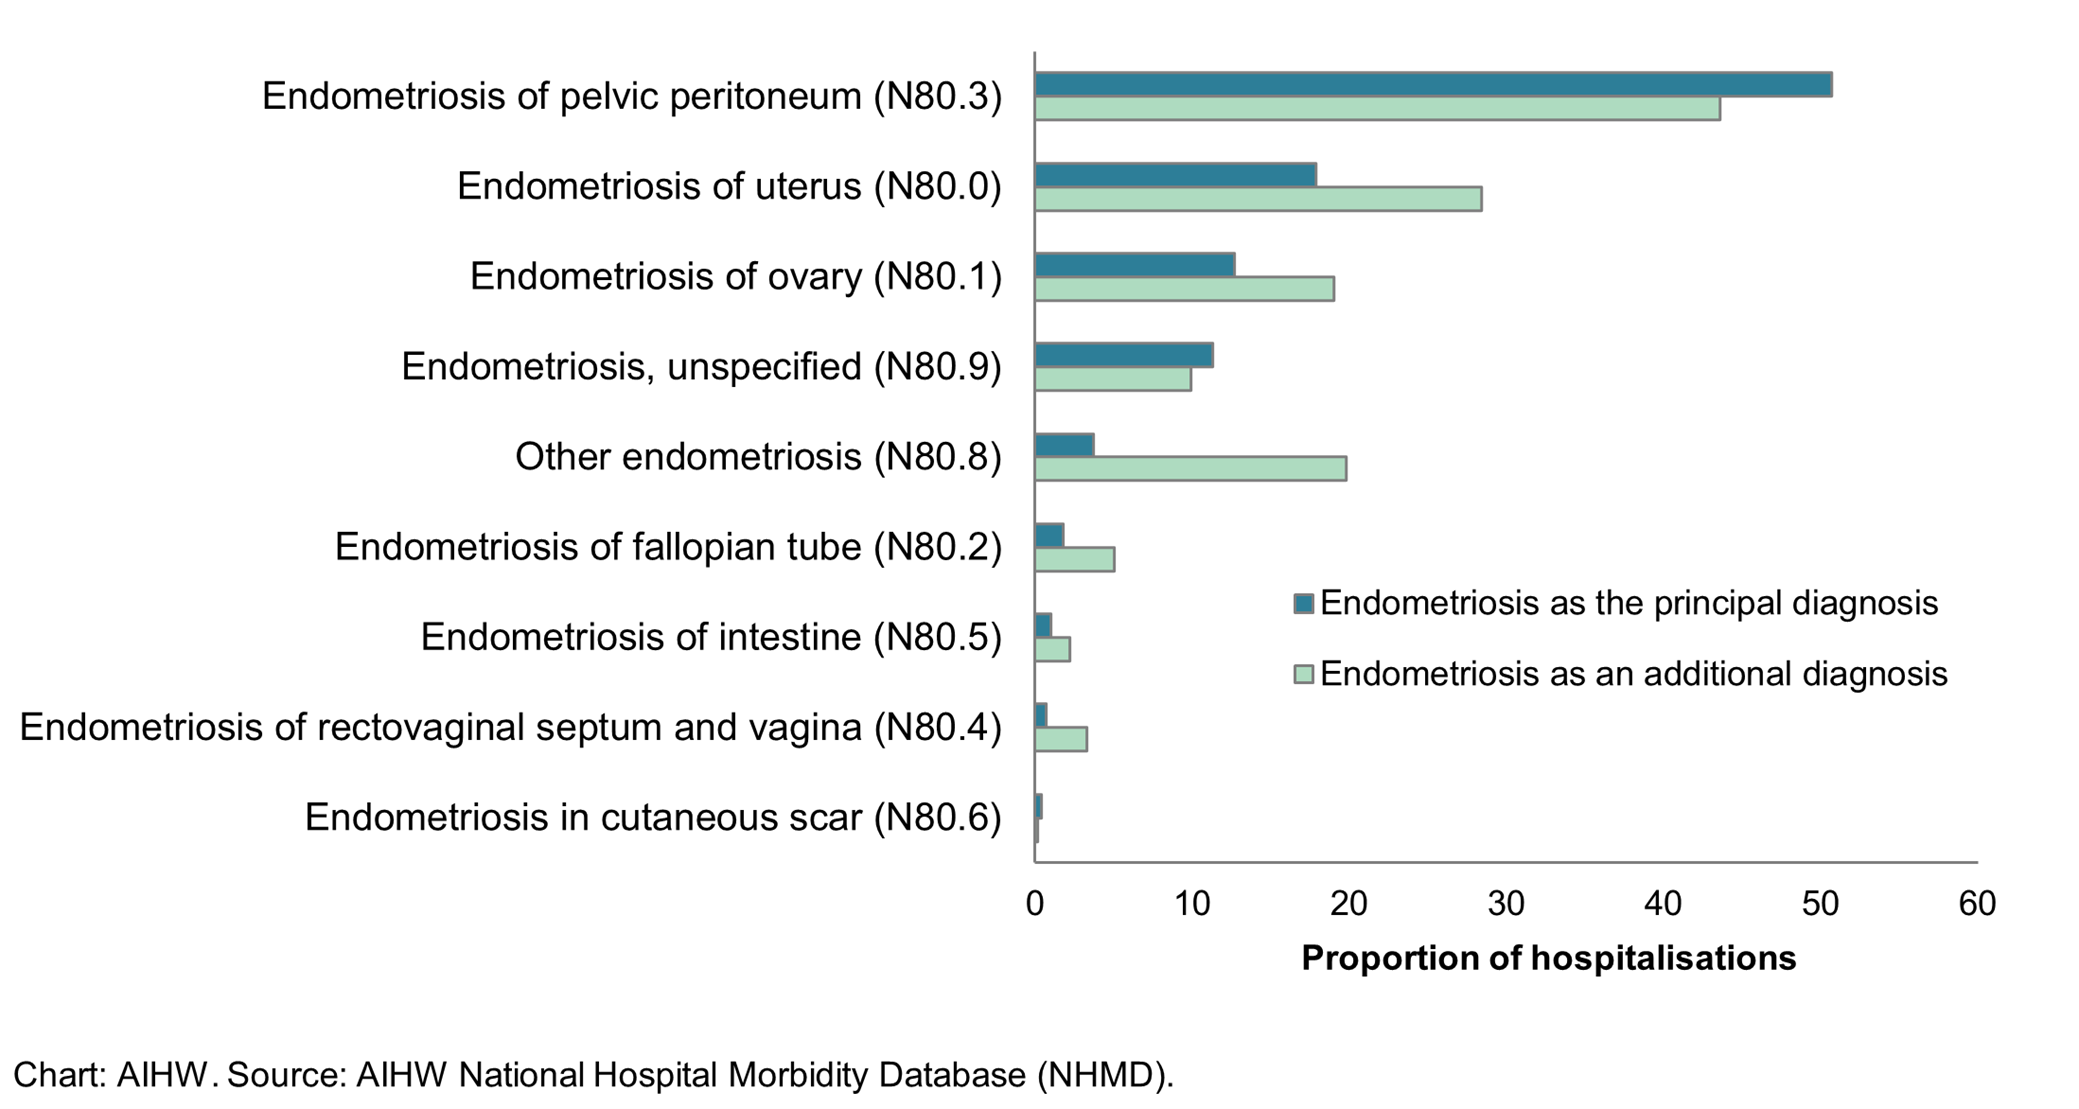 Alt text: This horizontal bar chart shows the proportion of endometriosis-related hospitalisations by 4th character ICD-10-AM code. The most common codes were generally similar for hospitalisations with an endometriosis principal diagnosis and hospitalisations where endometriosis was an additional diagnosis.